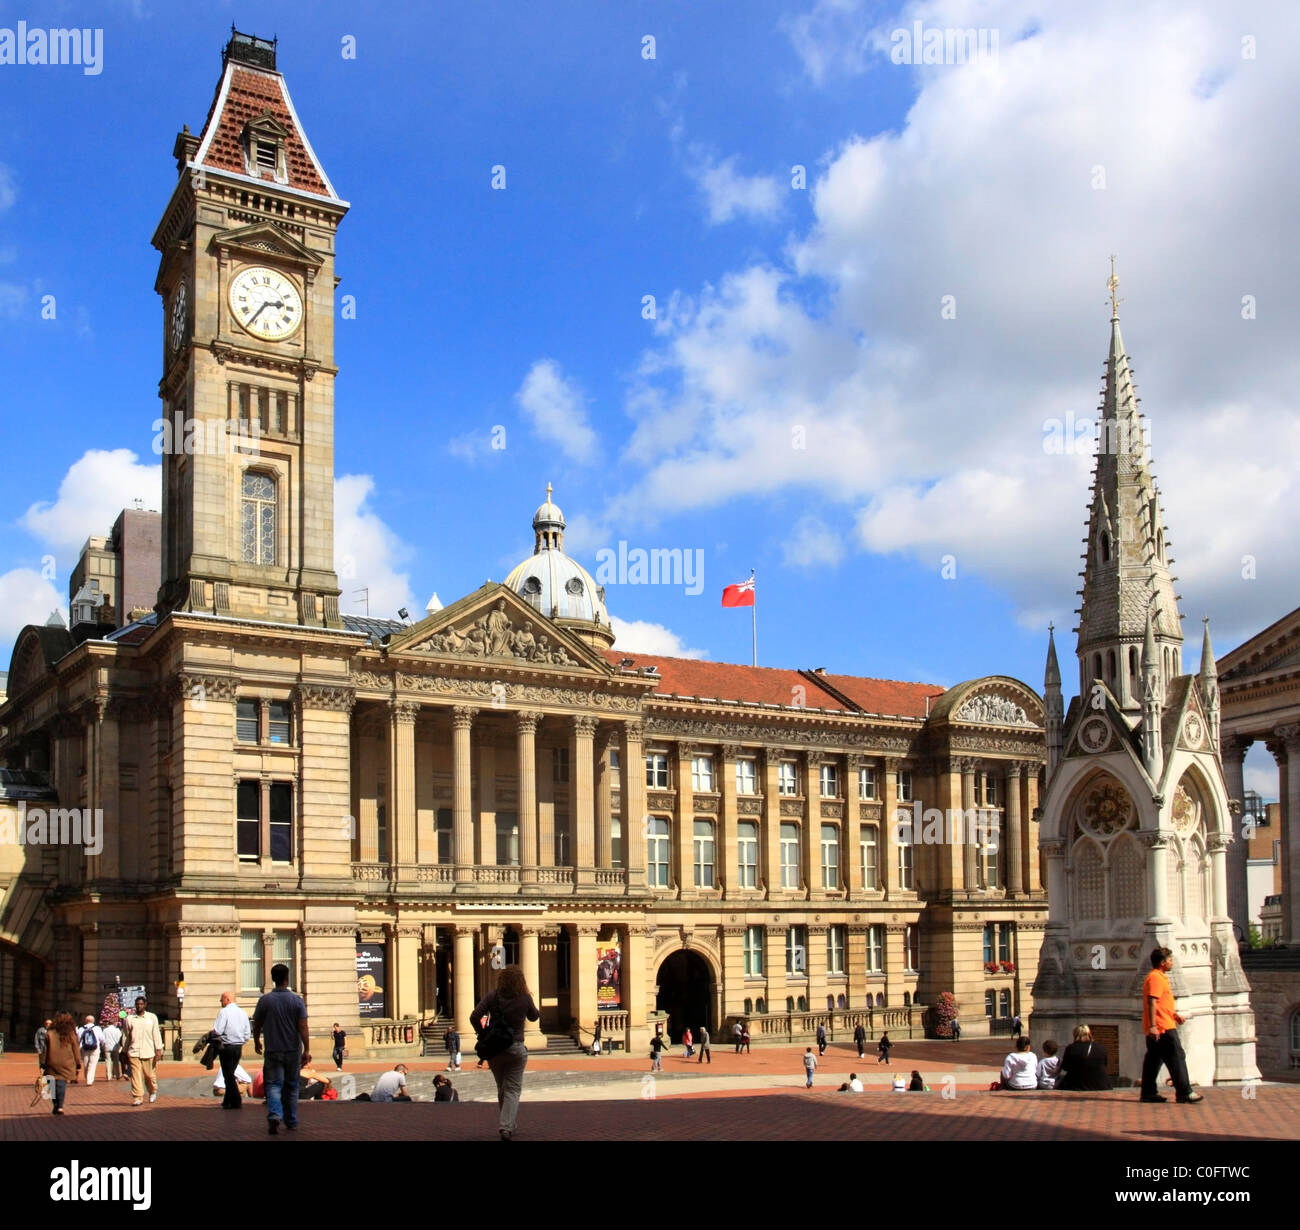 The Museum and Art Gallery and Chamberlain Monument, Chamberlain Square, Birmingham, West Midlands, England, Europe Stock Photo